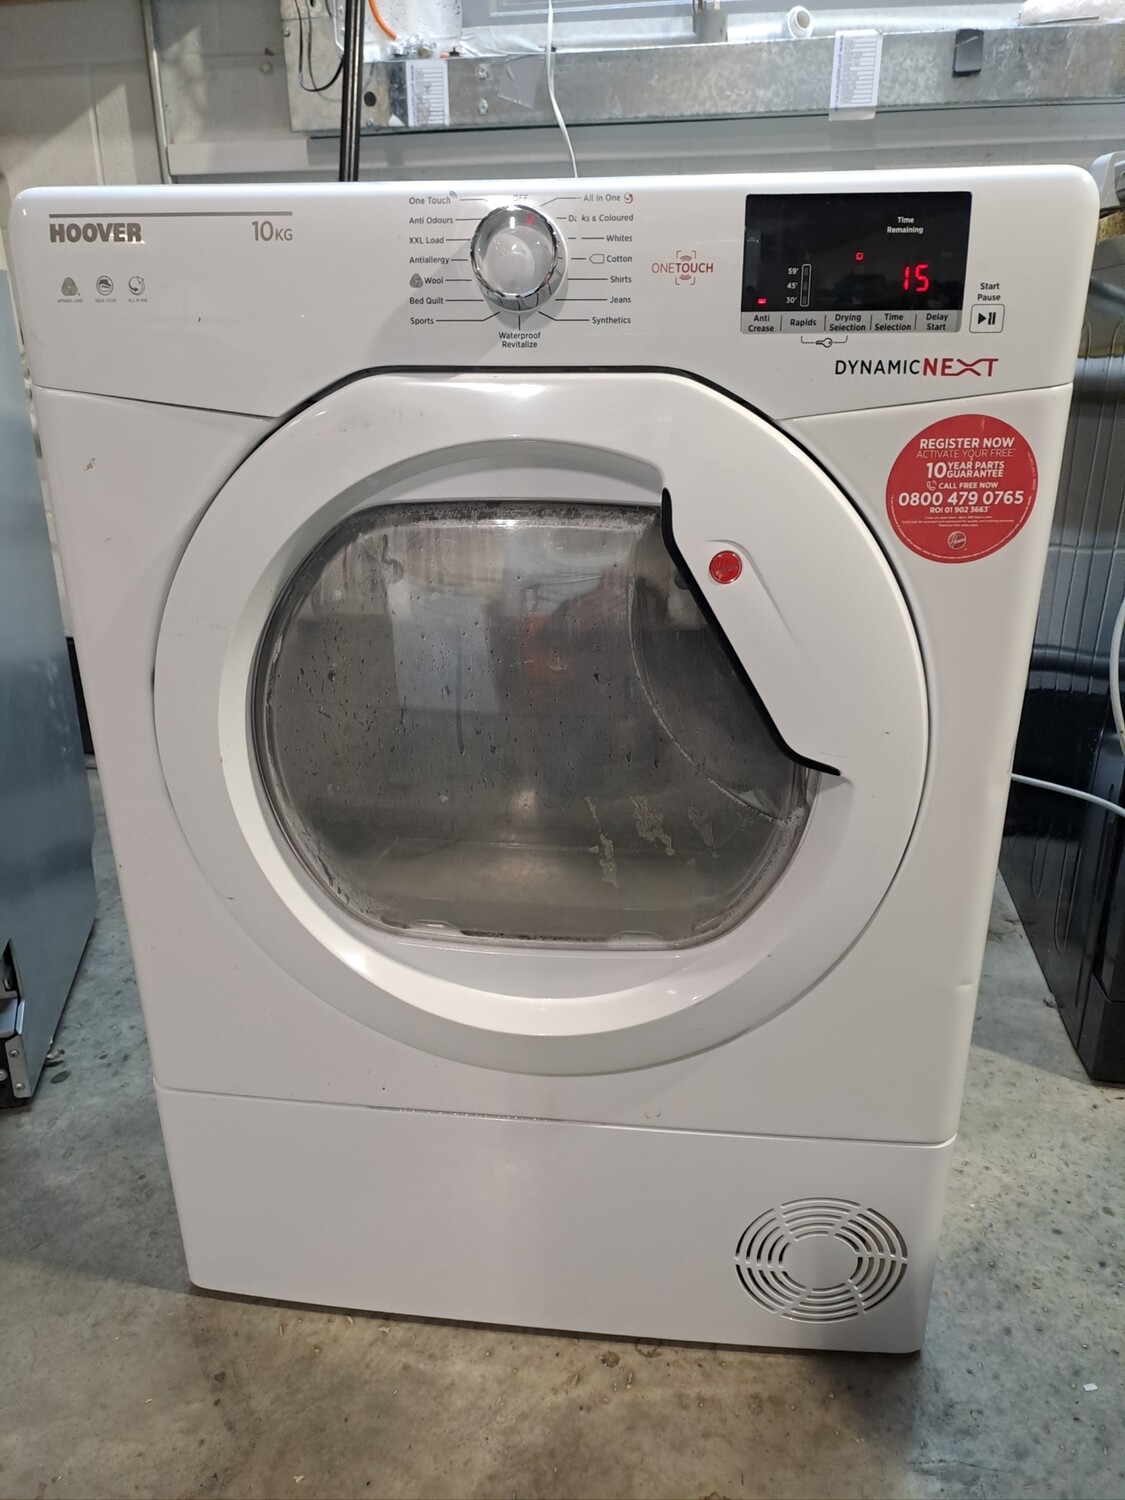 Hoover DXC10DE.80 10kg condenser Dryer Refurbished 6 Months Guarantee . This item is Located in our Whitby Road Shop